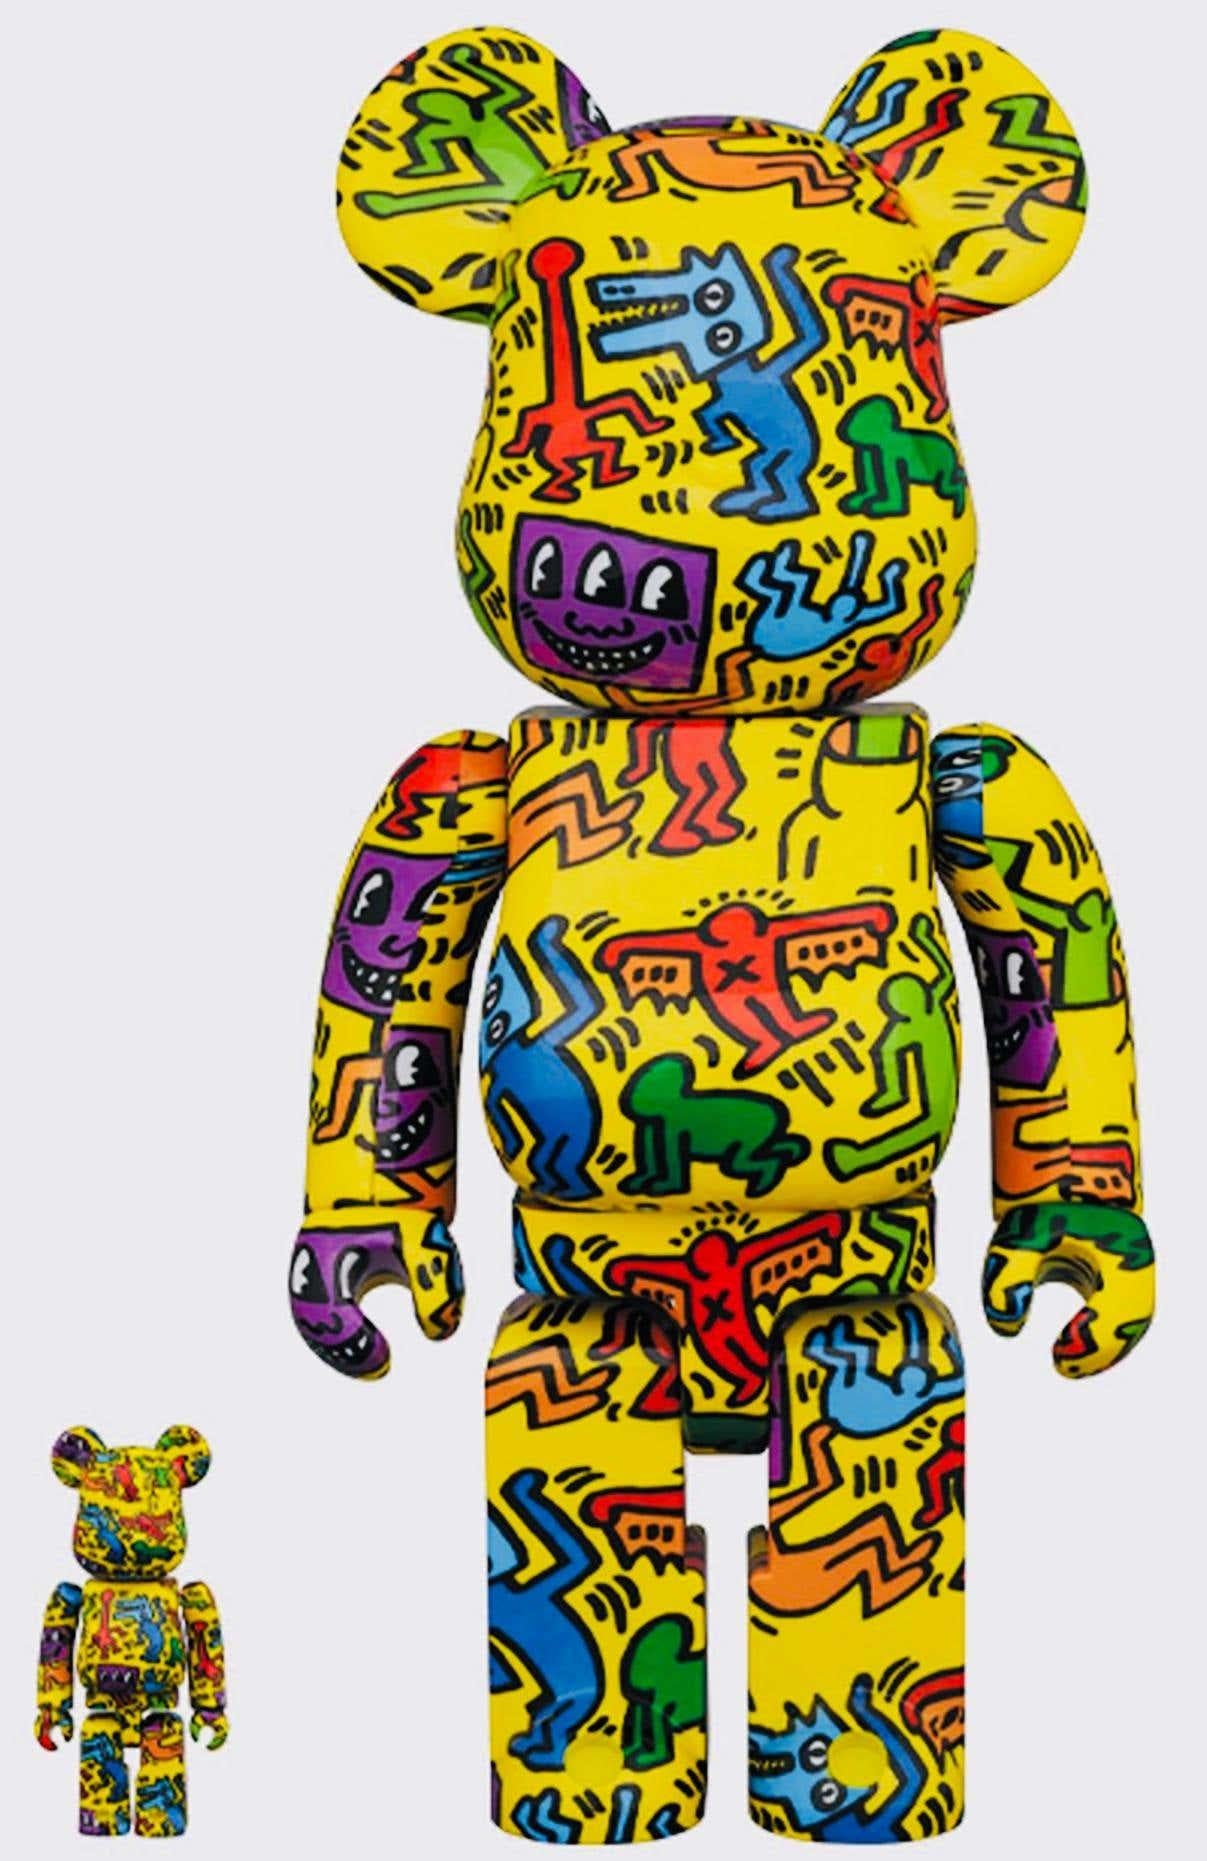 Keith Haring, Andy Warhol, Jean-Michel Basquiat Bearbrick 400%: set of 3 works  - Sculpture by after Jean-Michel Basquiat